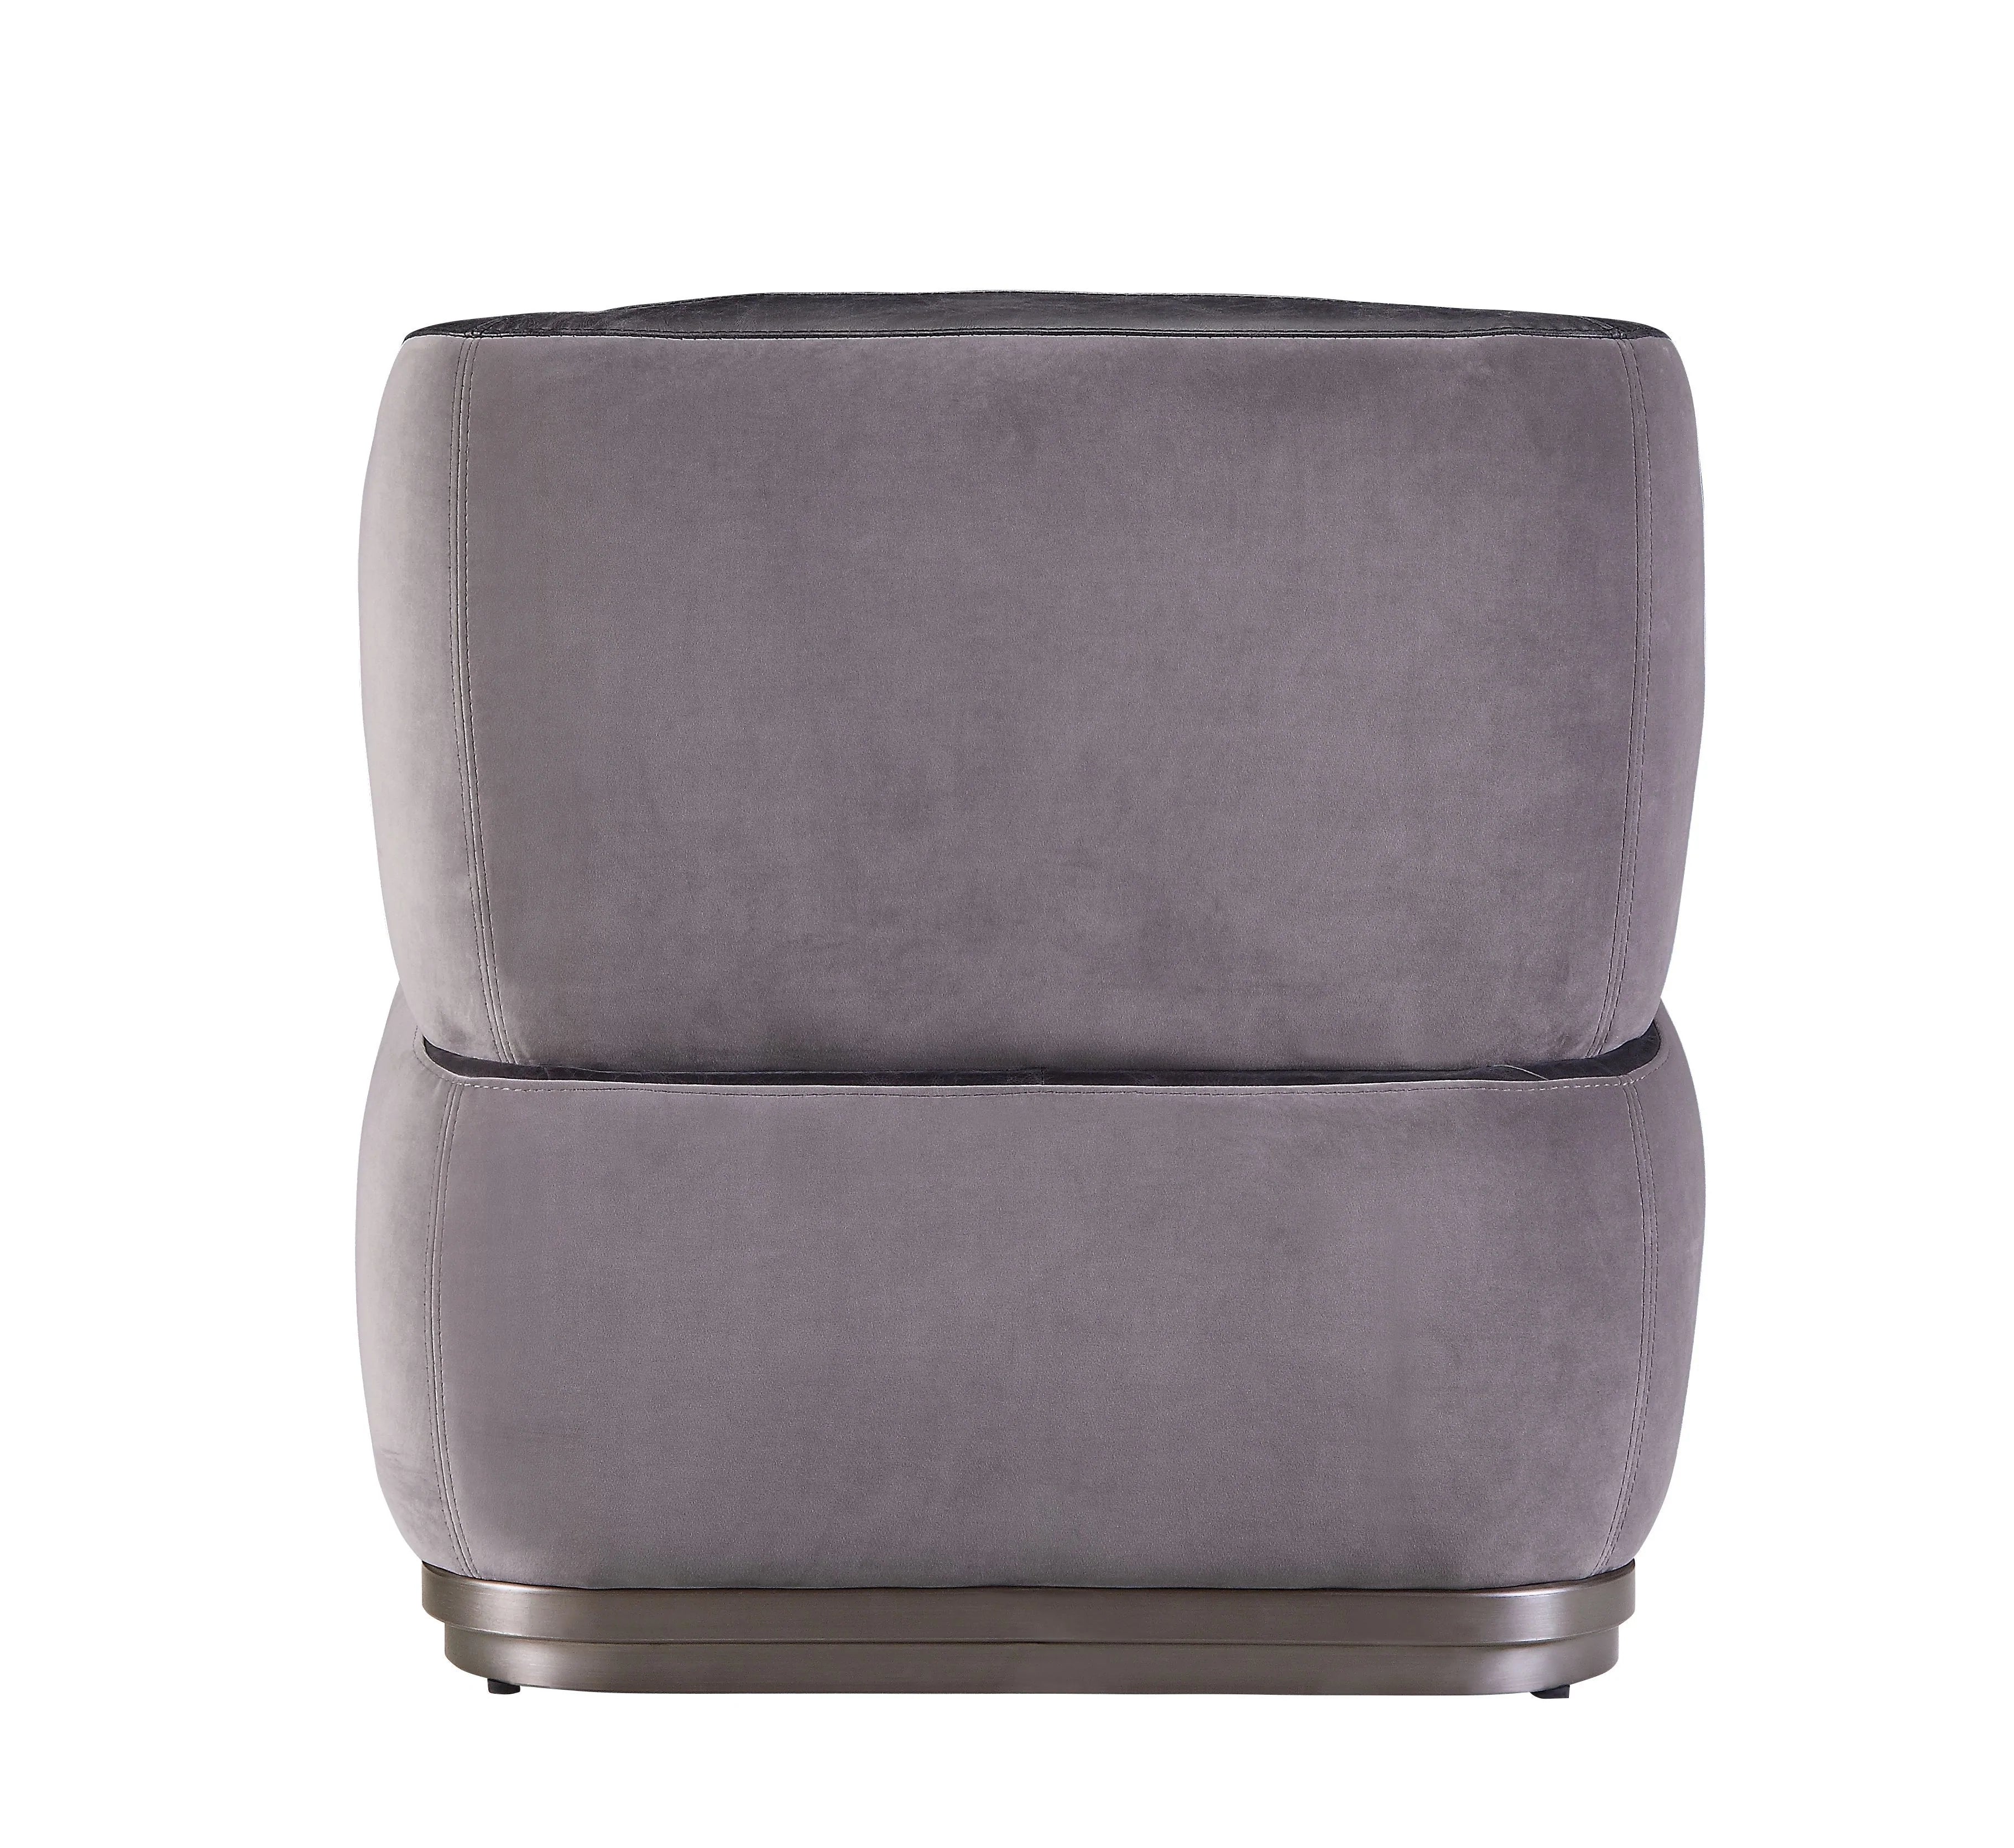 Decapree Antique Slate Top Grain Leather & Gray Velvet Accent Chair Model 59270 By ACME Furniture